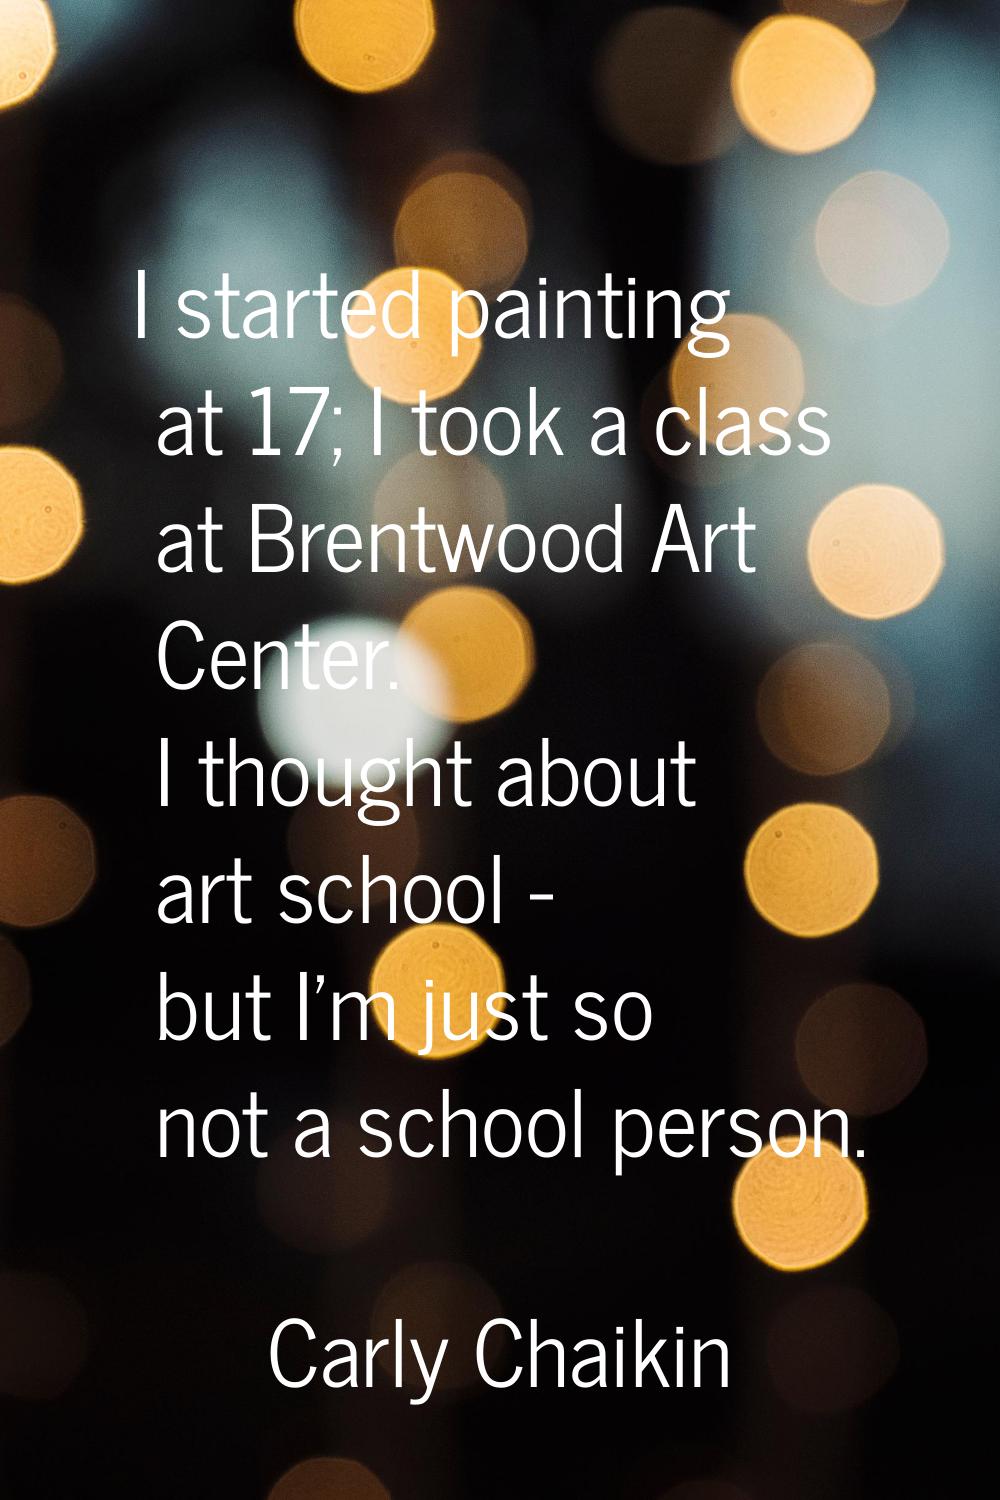 I started painting at 17; I took a class at Brentwood Art Center. I thought about art school - but 